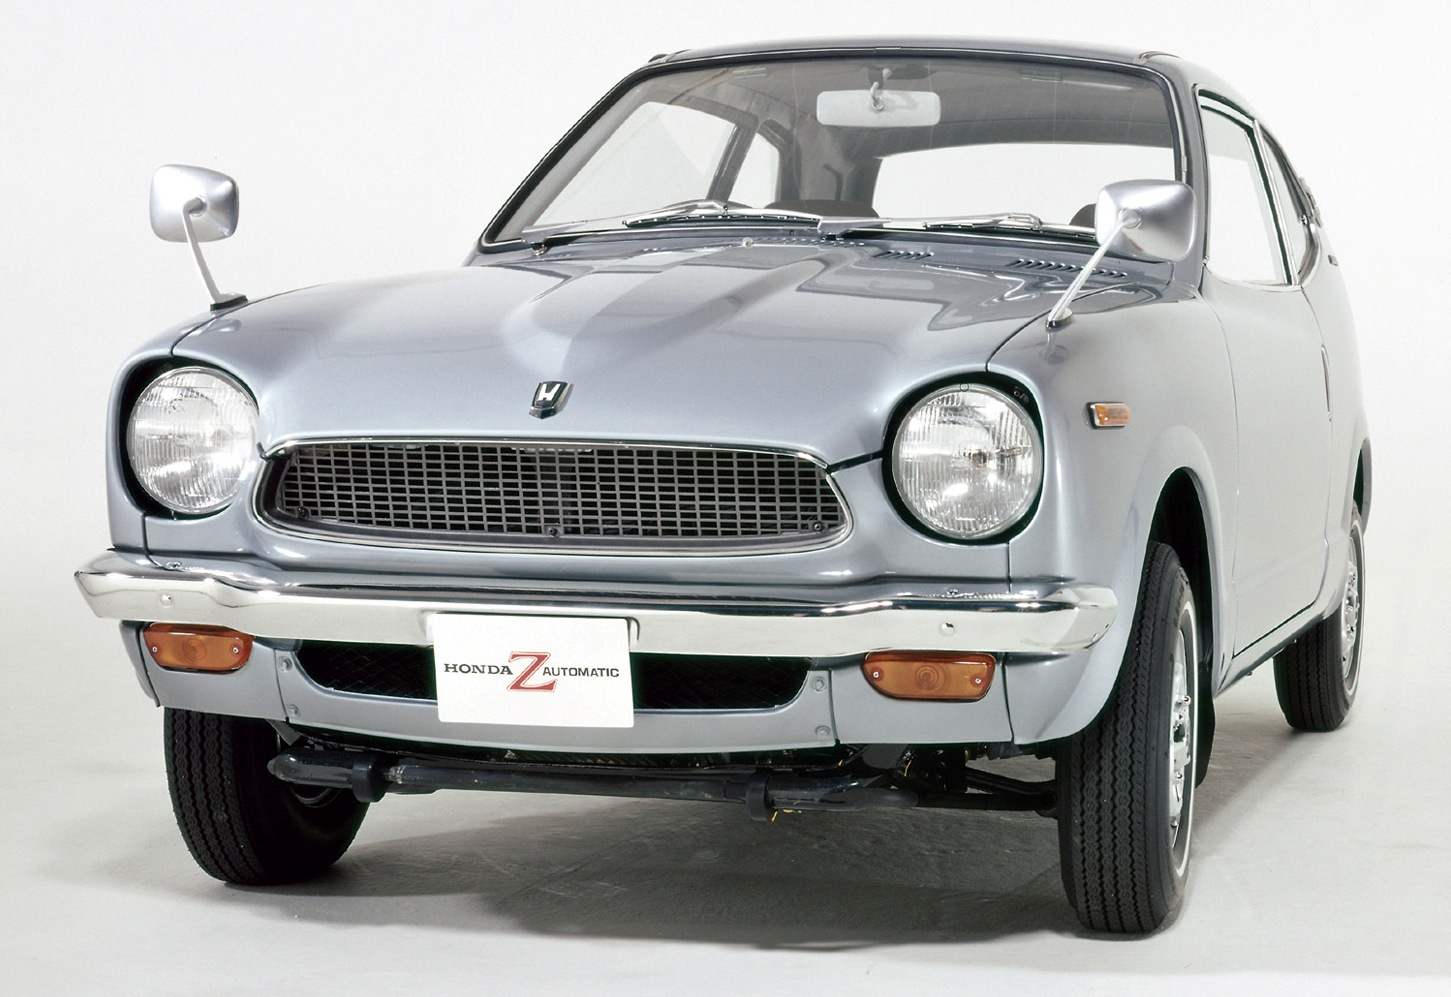 Mini-Z Honda release 1970 with a 2-cylinder engine working volume of 350 cm3